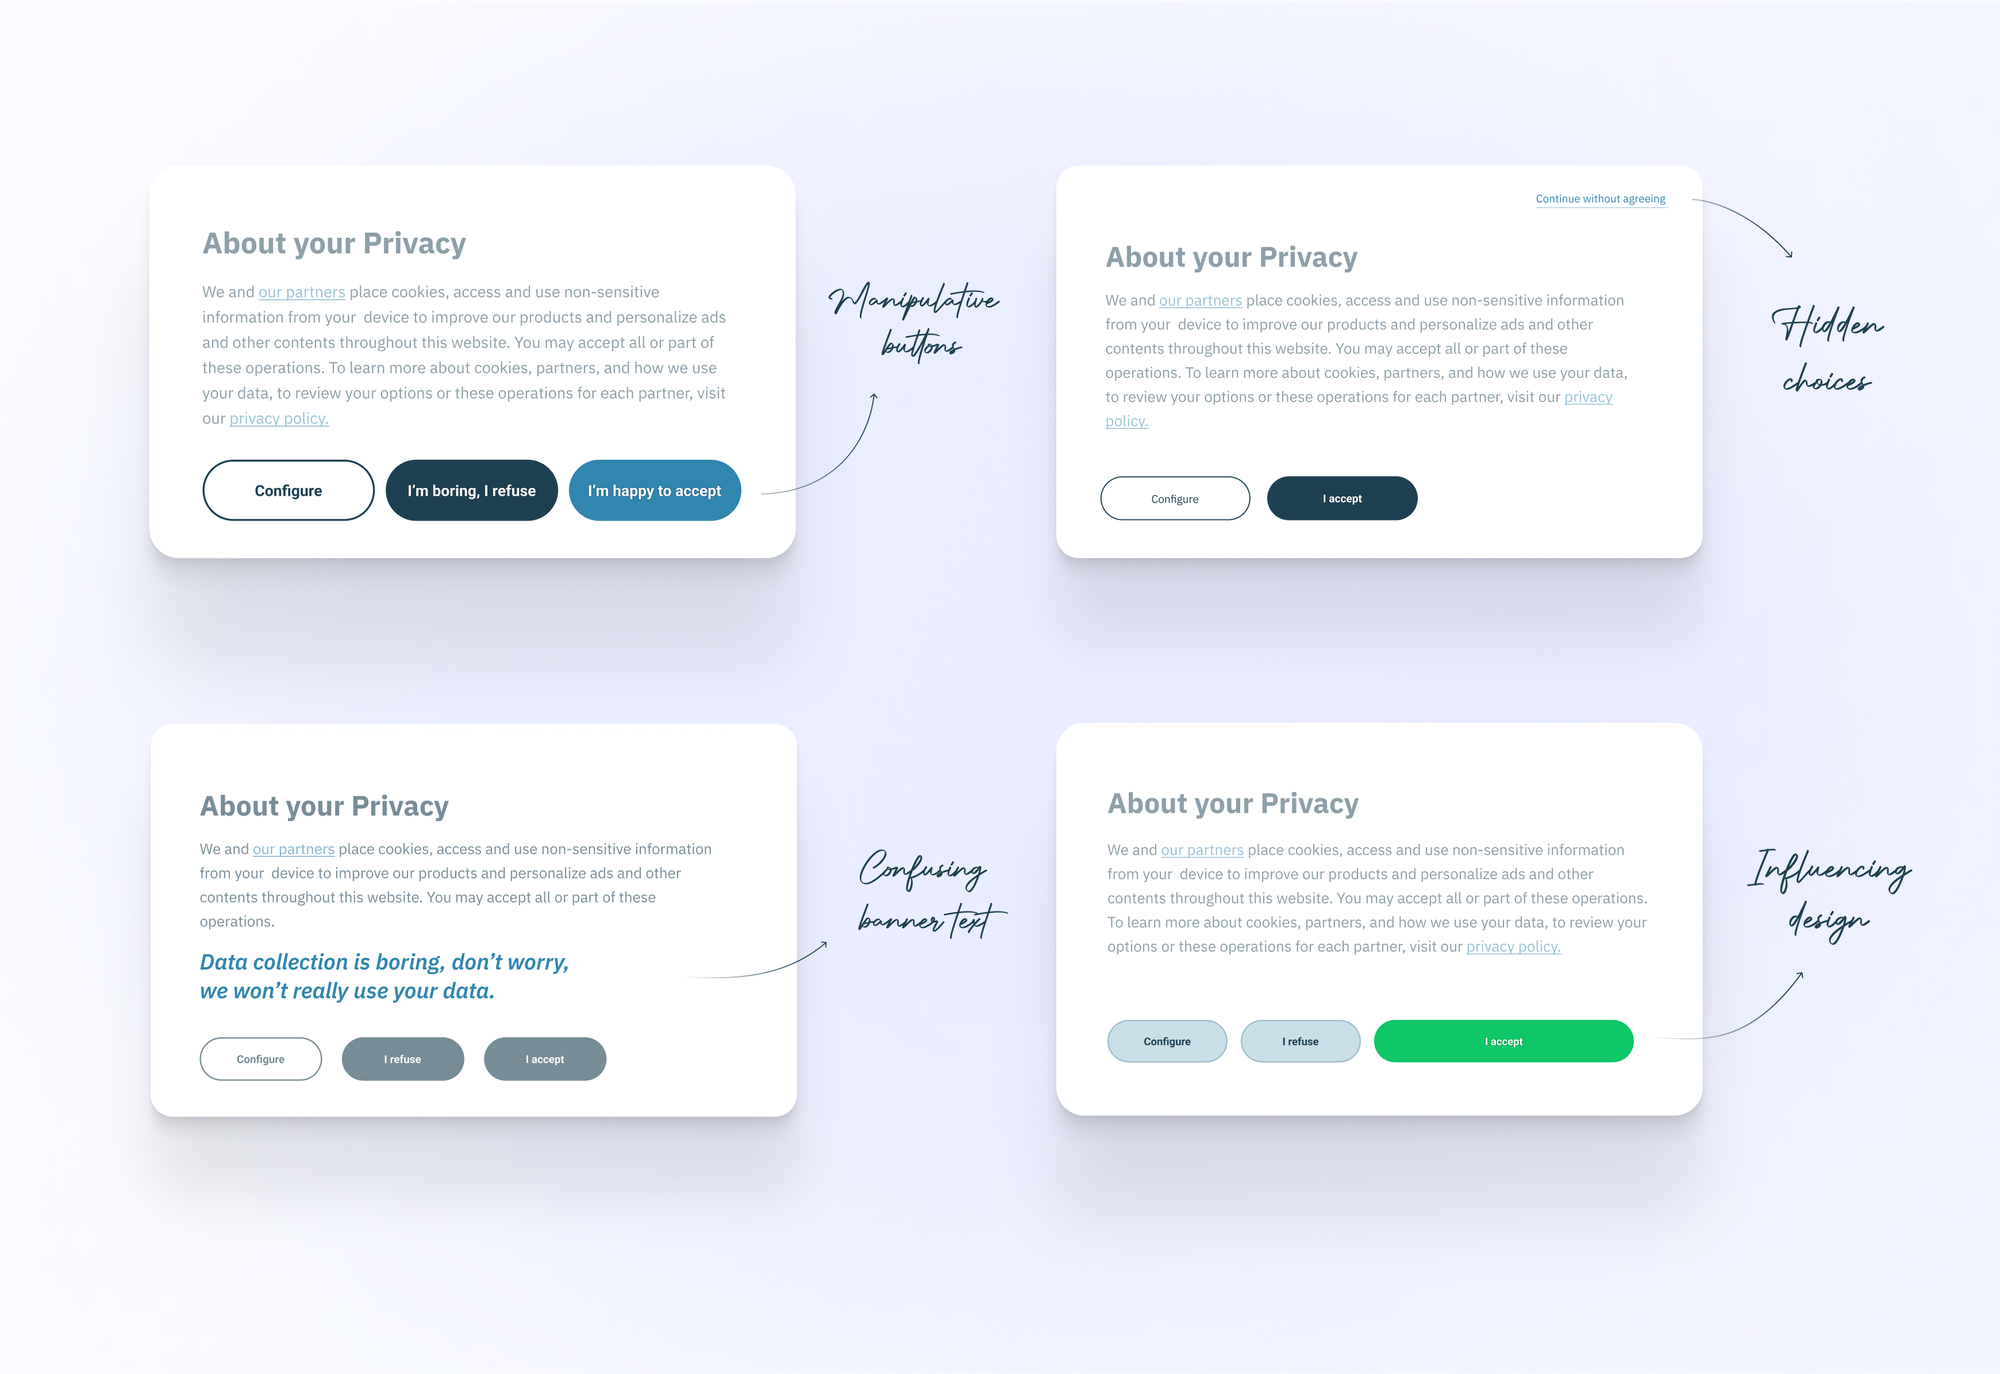 A mockup of 4 consent banners illustrating four types of dark patterns: manipulative buttons, hidden choices, confusing banner text, and influencing design.